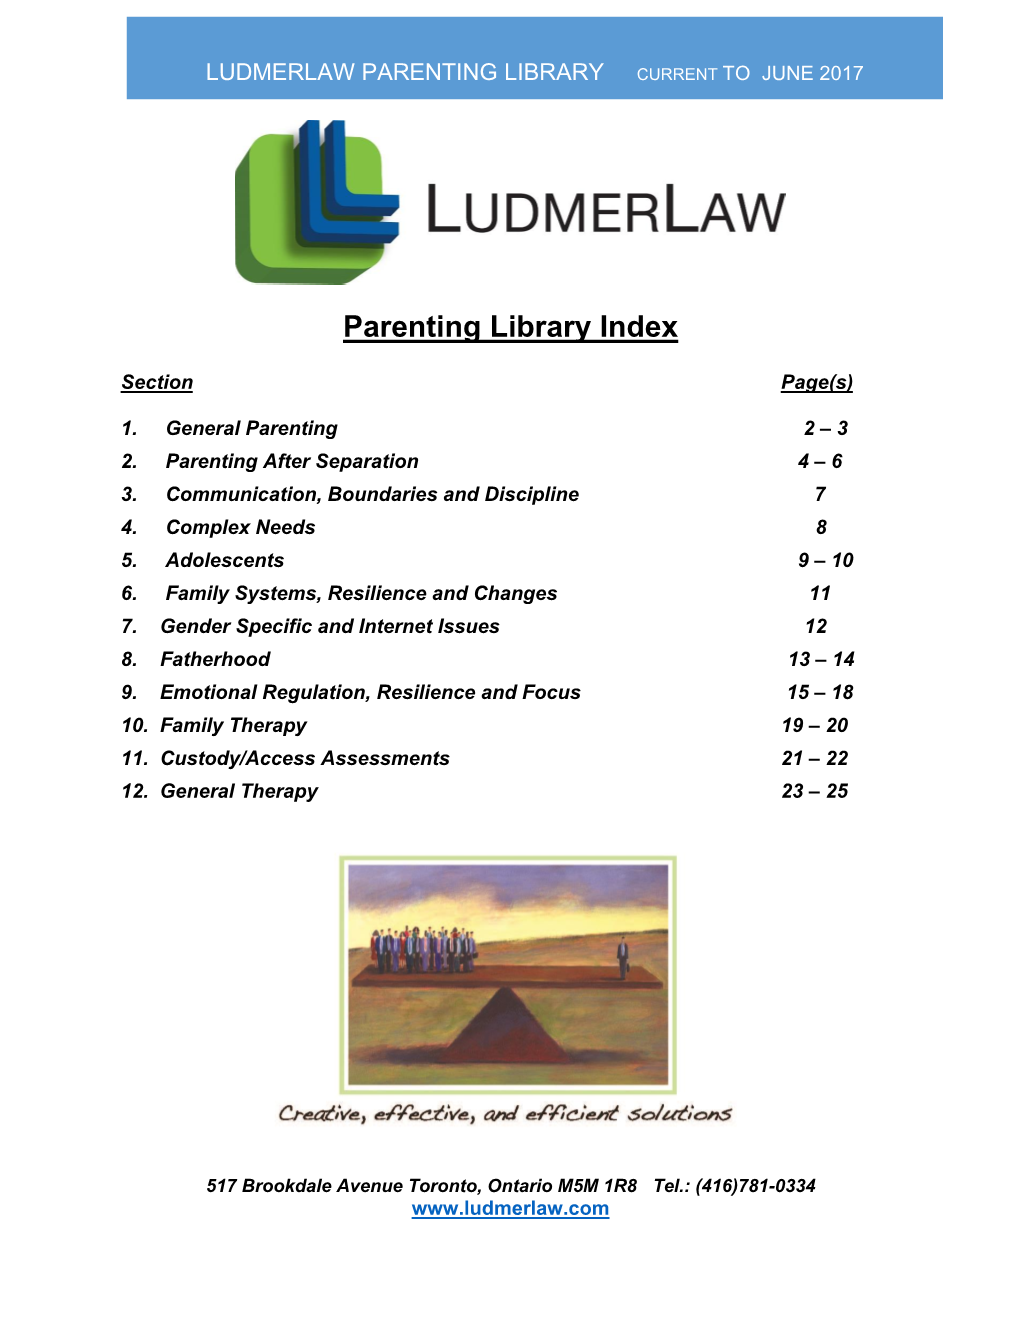 Ludmerlaw Parenting Library Current to June 2017